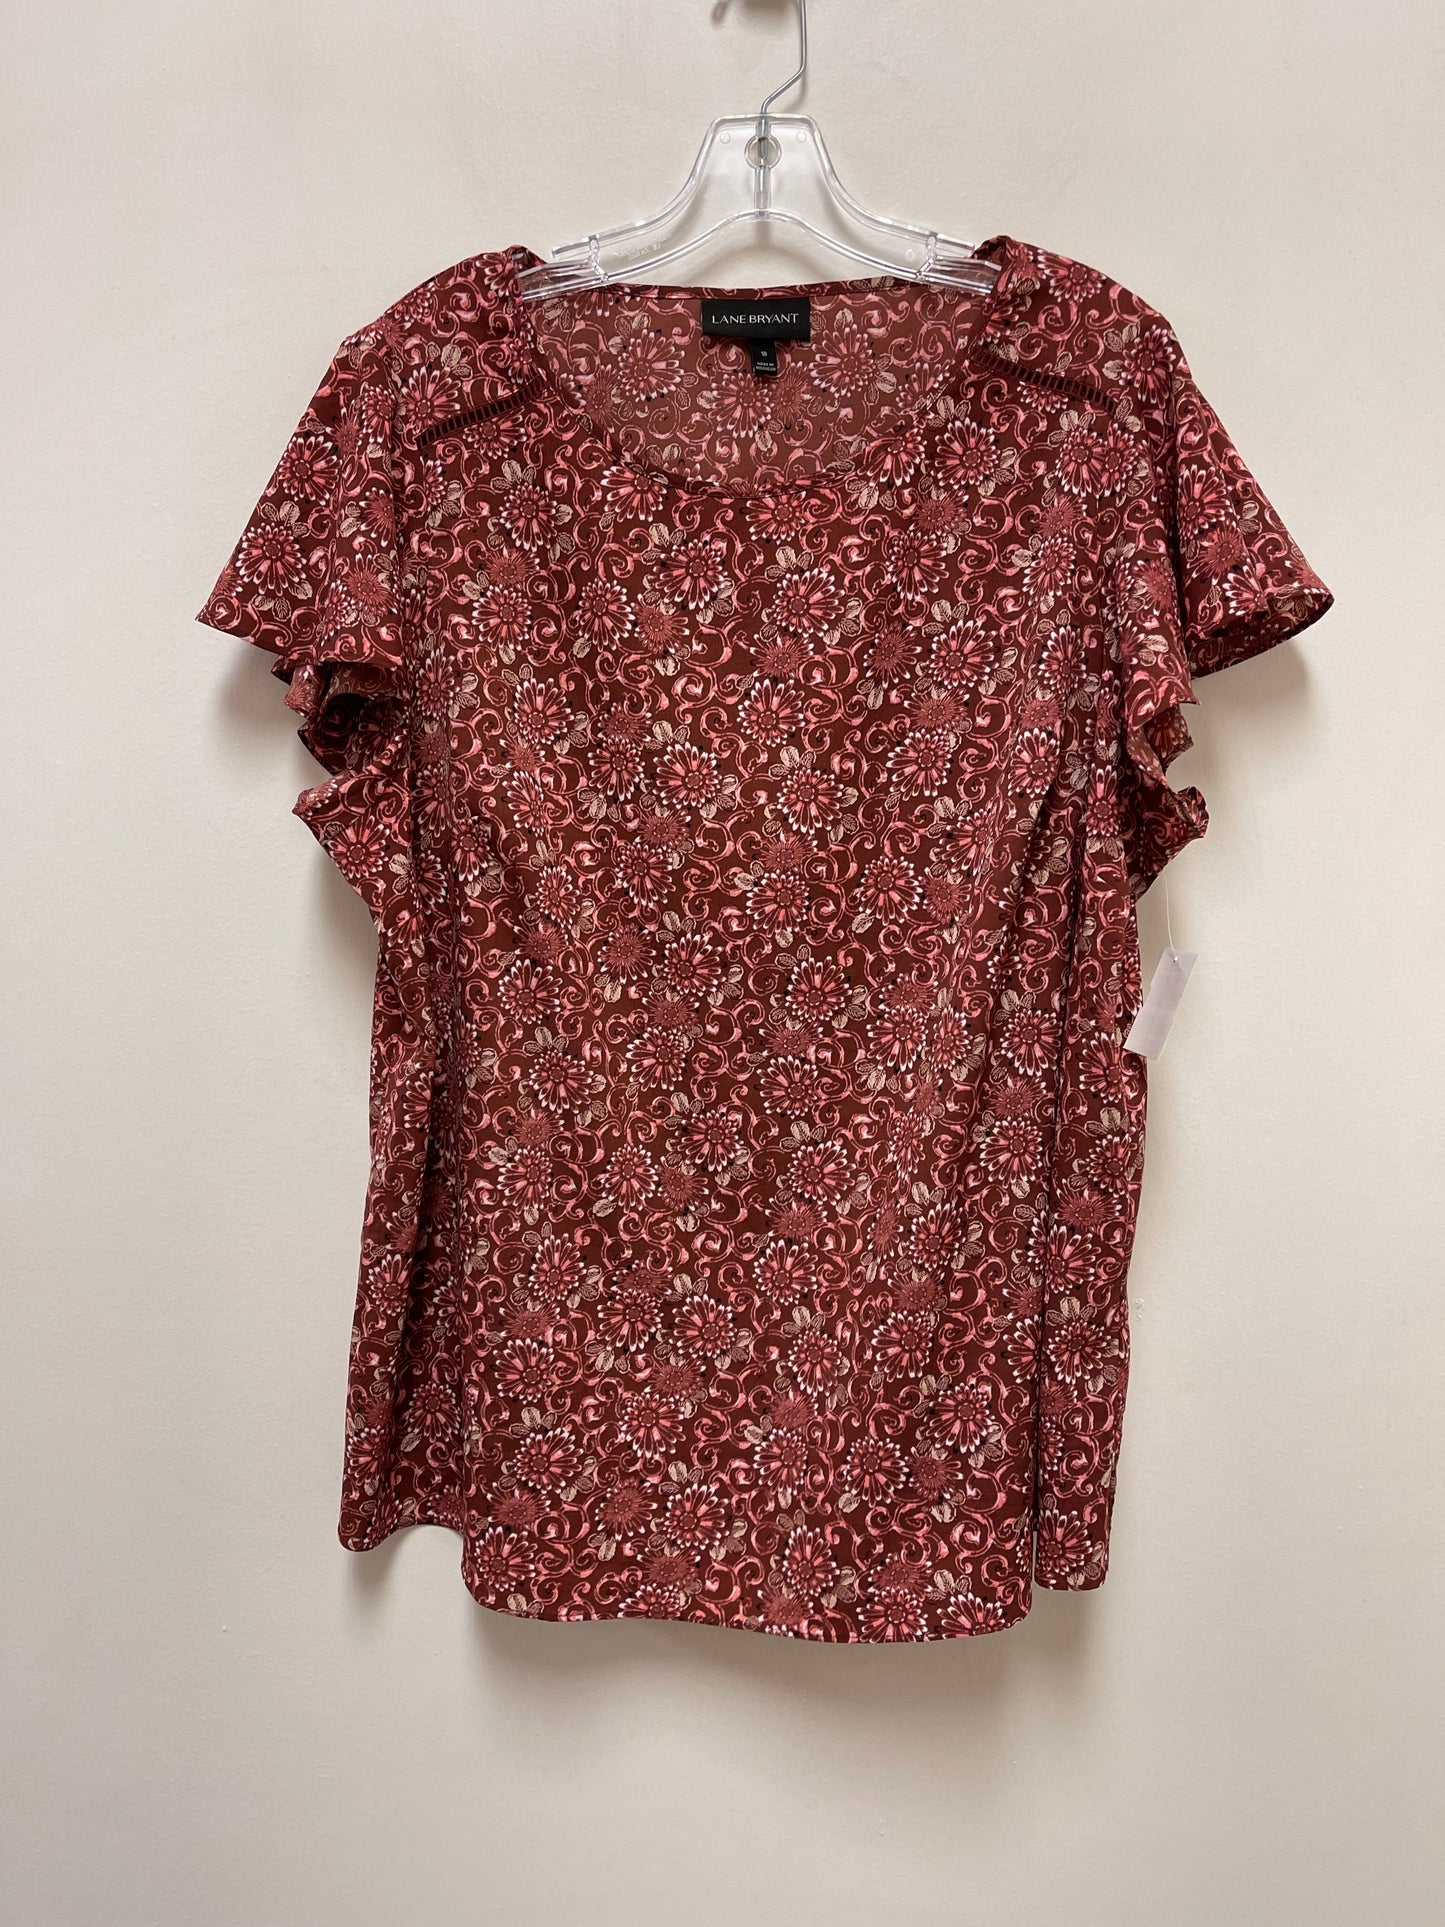 Red Top Short Sleeve Lane Bryant, Size 2x